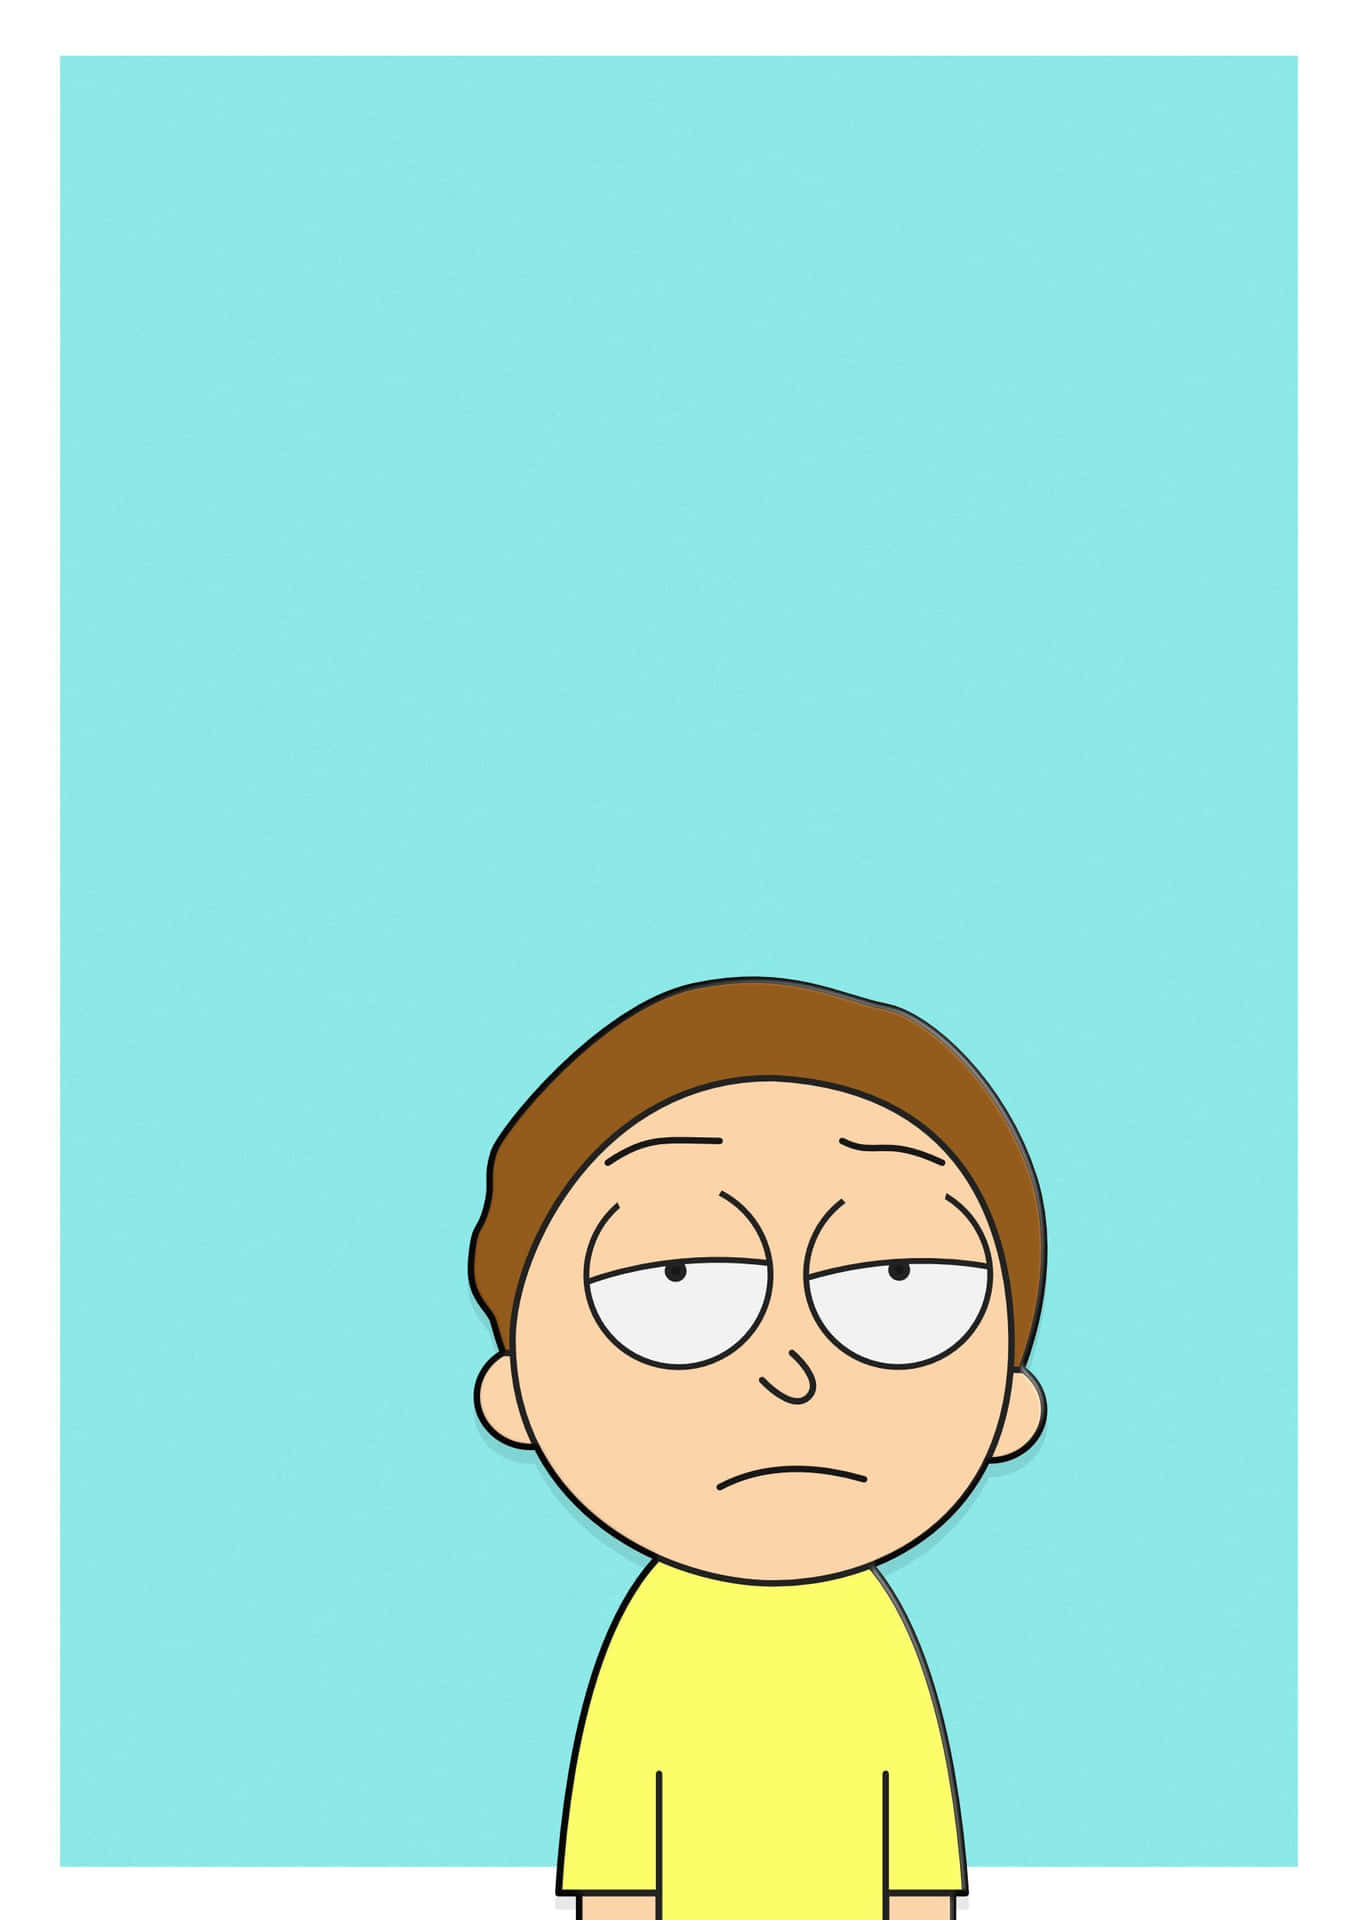 Morty Smith in the cartoon series Rick and Morty Wallpaper